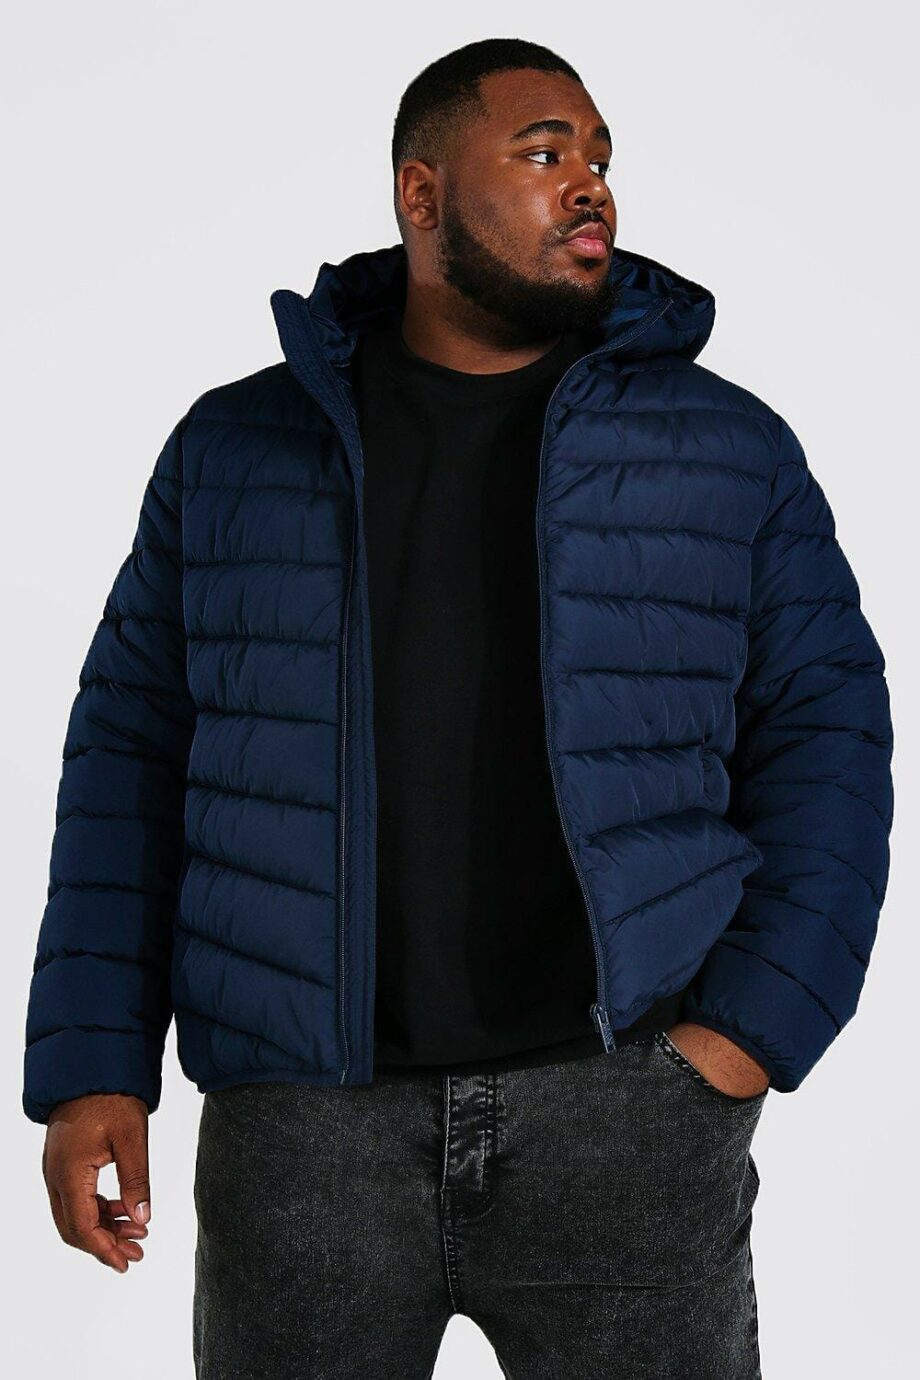 Mens Navy Plus Size Recycled Quilted Zip Through Jacket, Navy